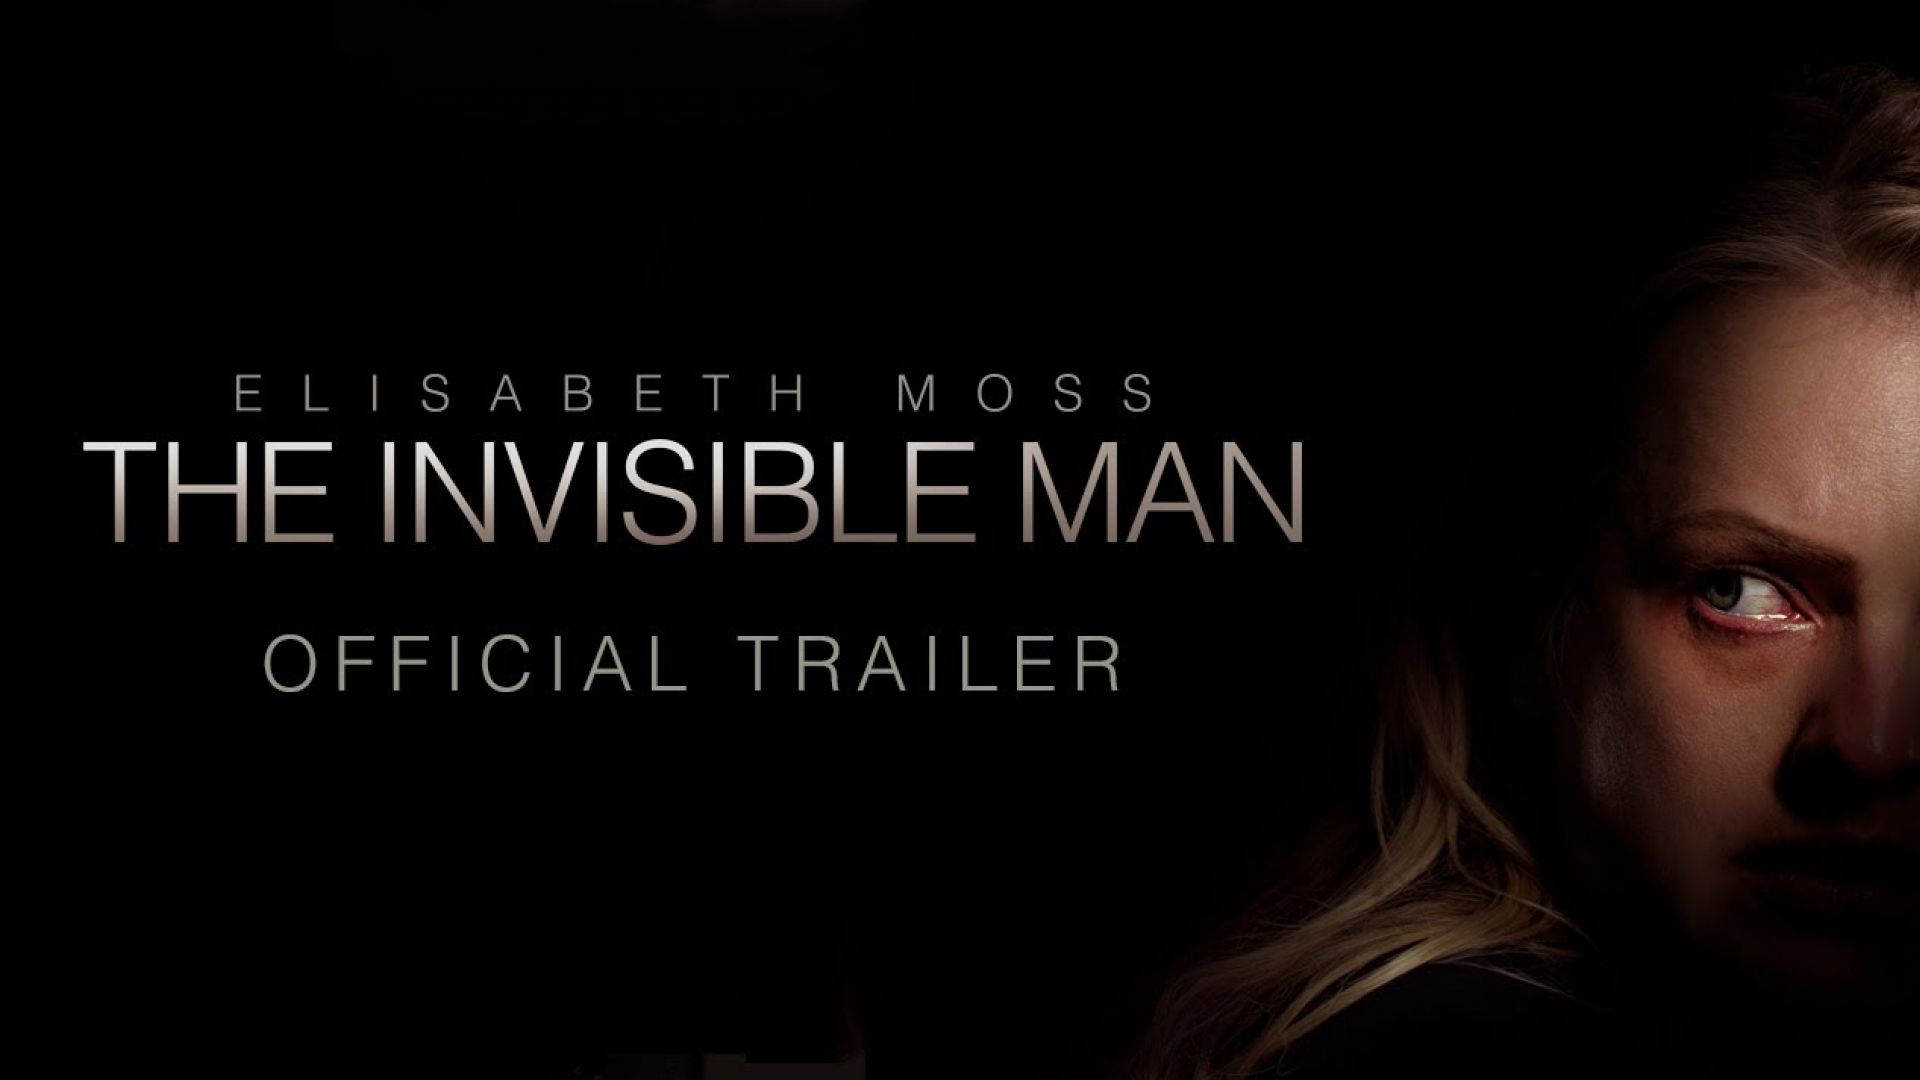 The Invisible Man - Opens February 28, 2020